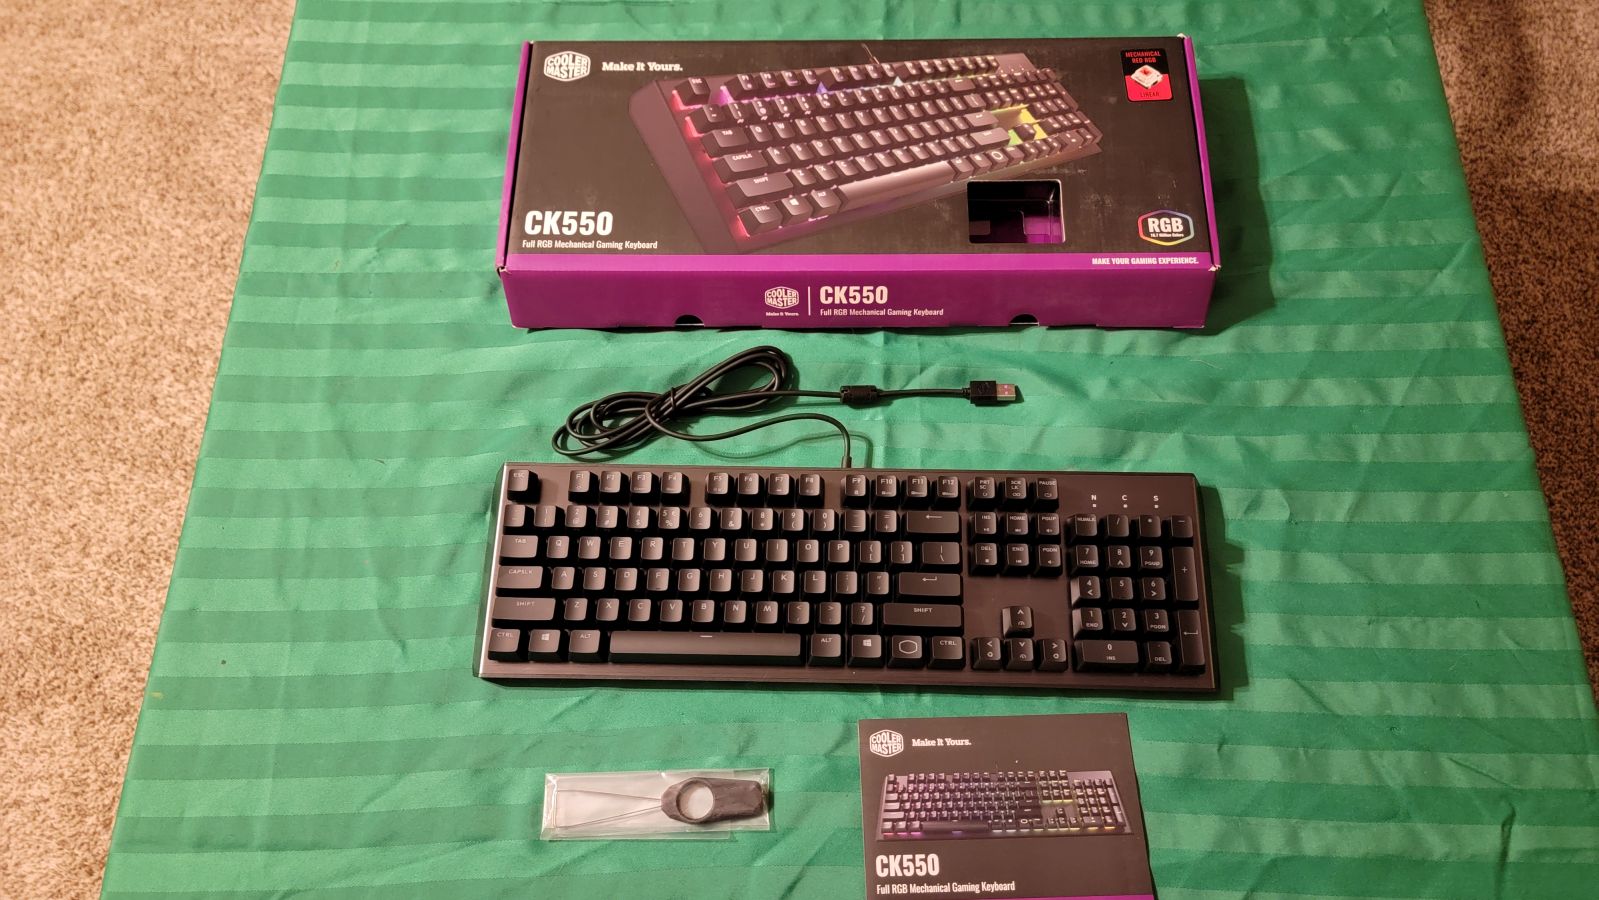 Cooler Master Ck550 Mechanical Keyboard And Mm7 Gaming Mouse Review Quality And Style Meet Gaming Trend